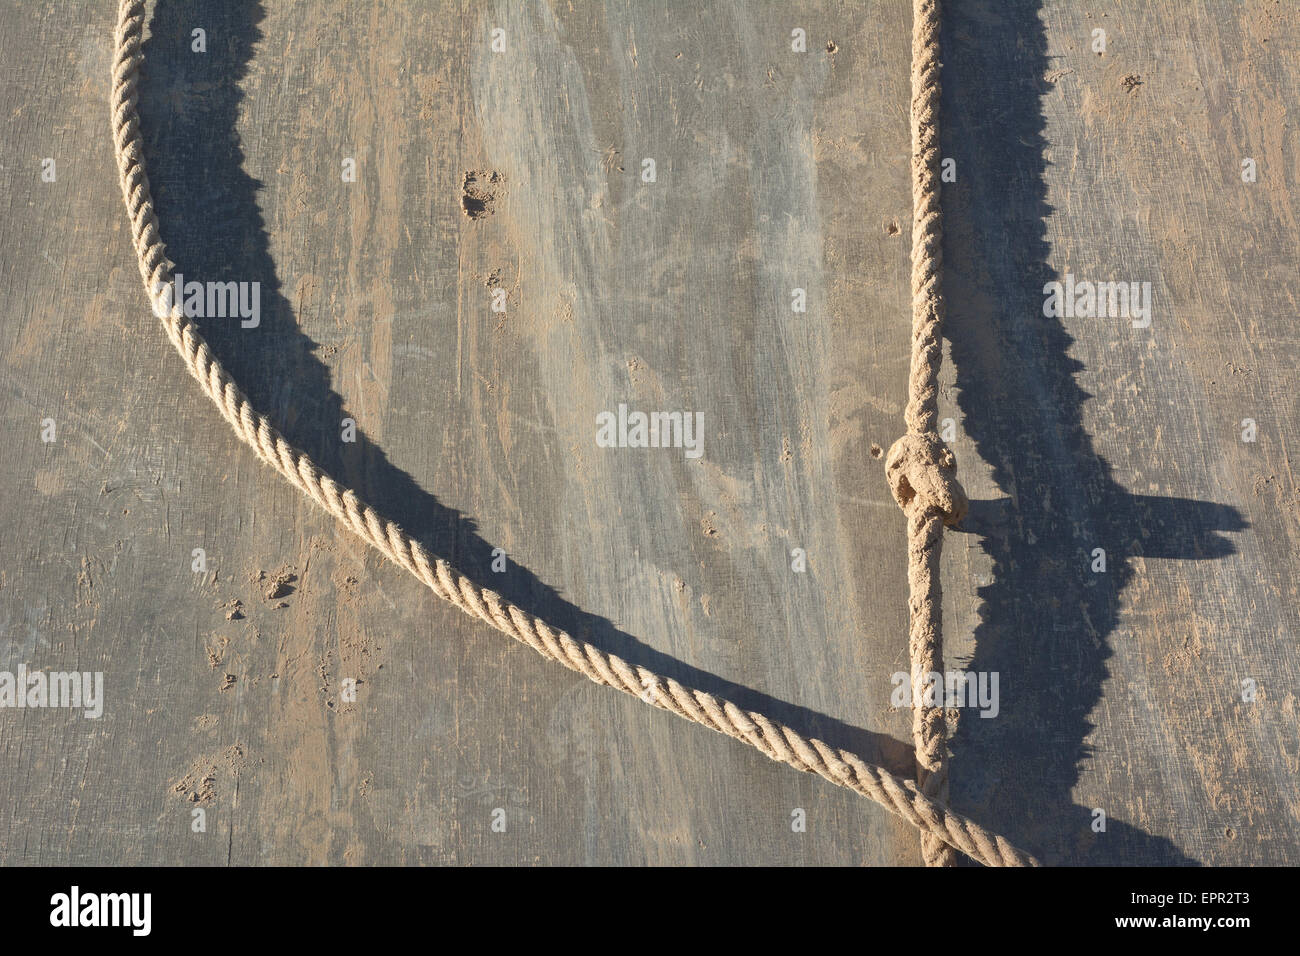 Muddy Rappelling Wall with Rope as Healthy Exercise Stock Photo